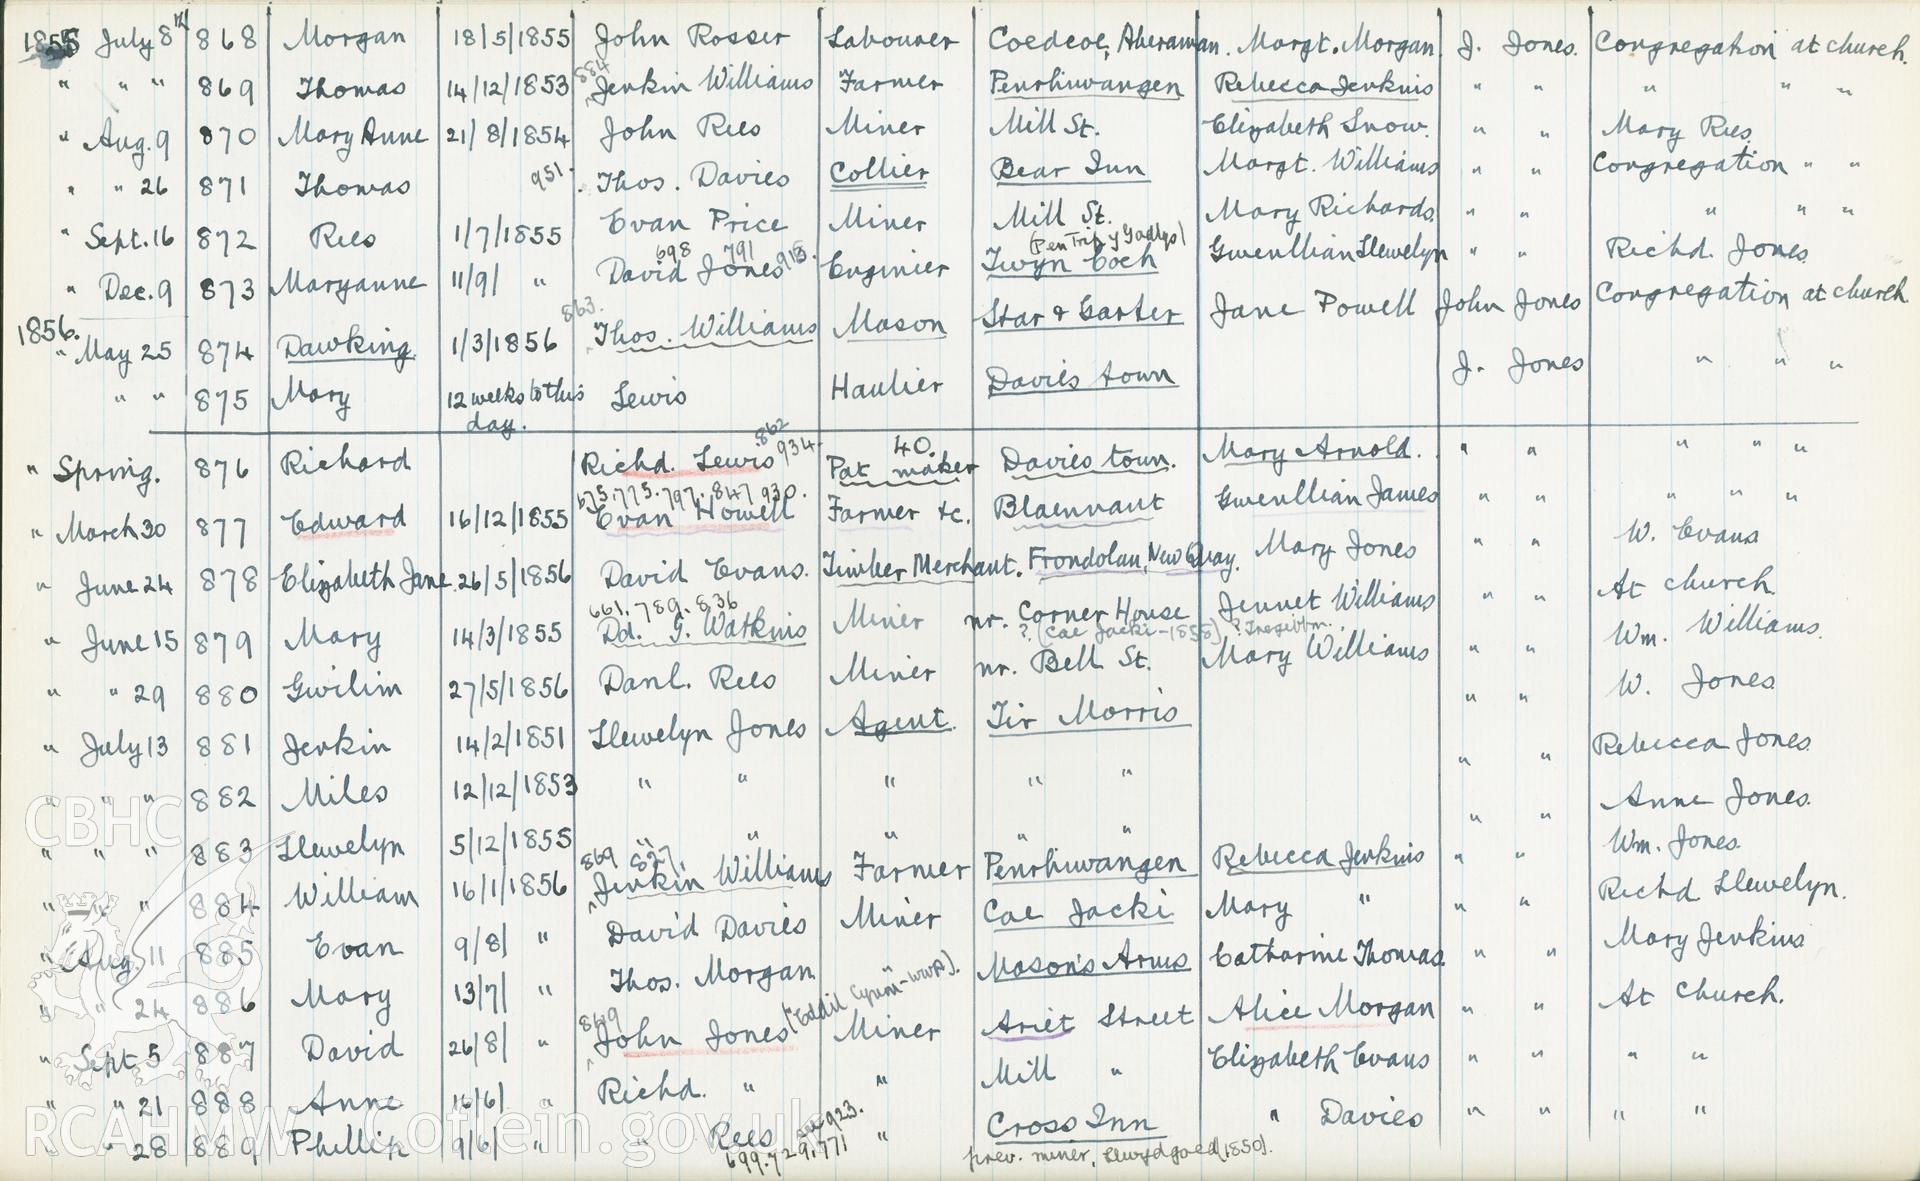 "Baptism Registered" book for Hen Dy Cwrdd, made between April 19th and 28th, 1941, by W. W. Price. Page listing baptisms from 8th July 1855 to 28th September 1856. Donated to the RCAHMW as part of the Digital Dissent Project.